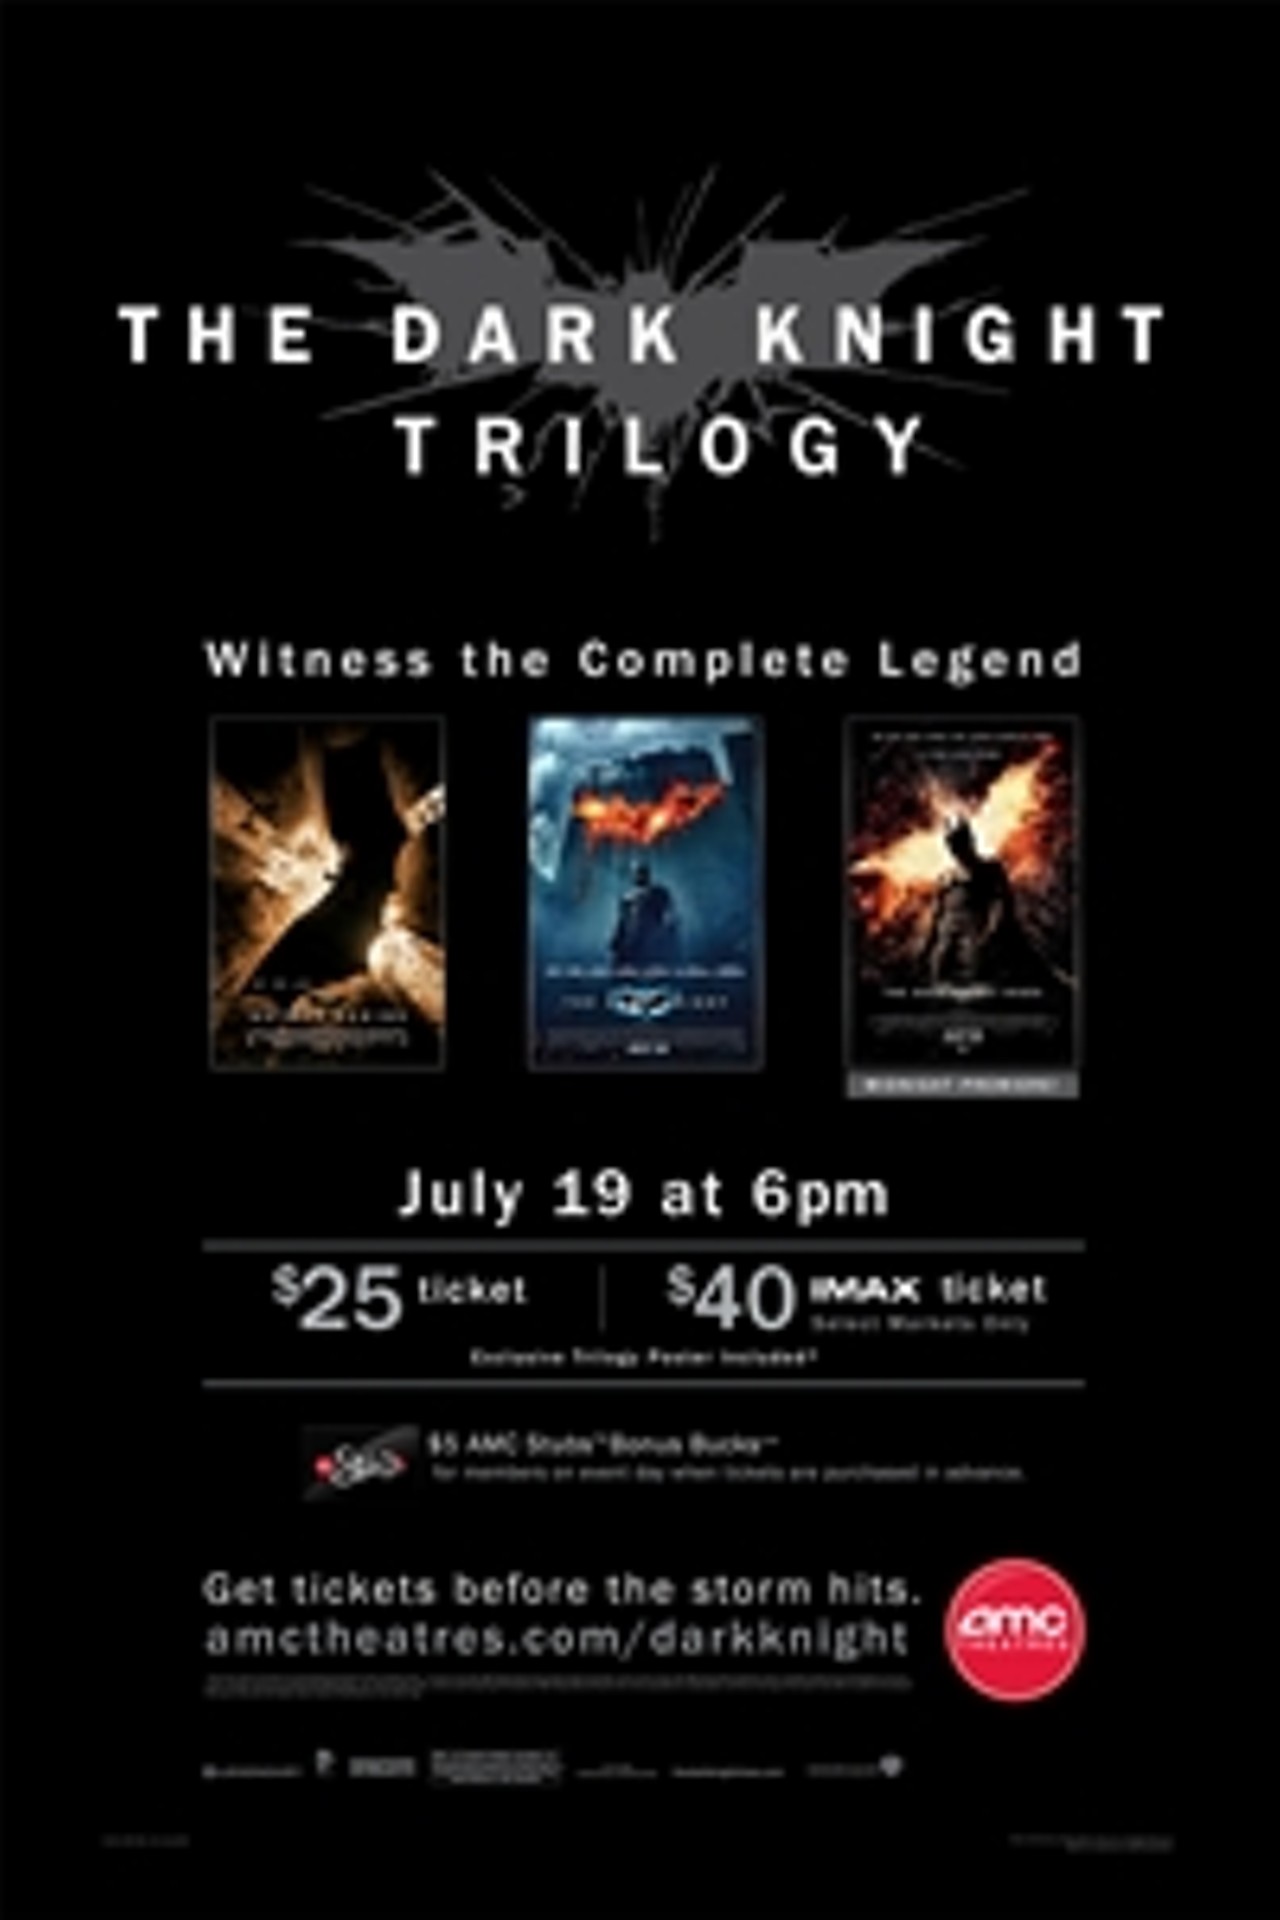 The Dark Knight Trilogy - The IMAX Experience | Cleveland Scene